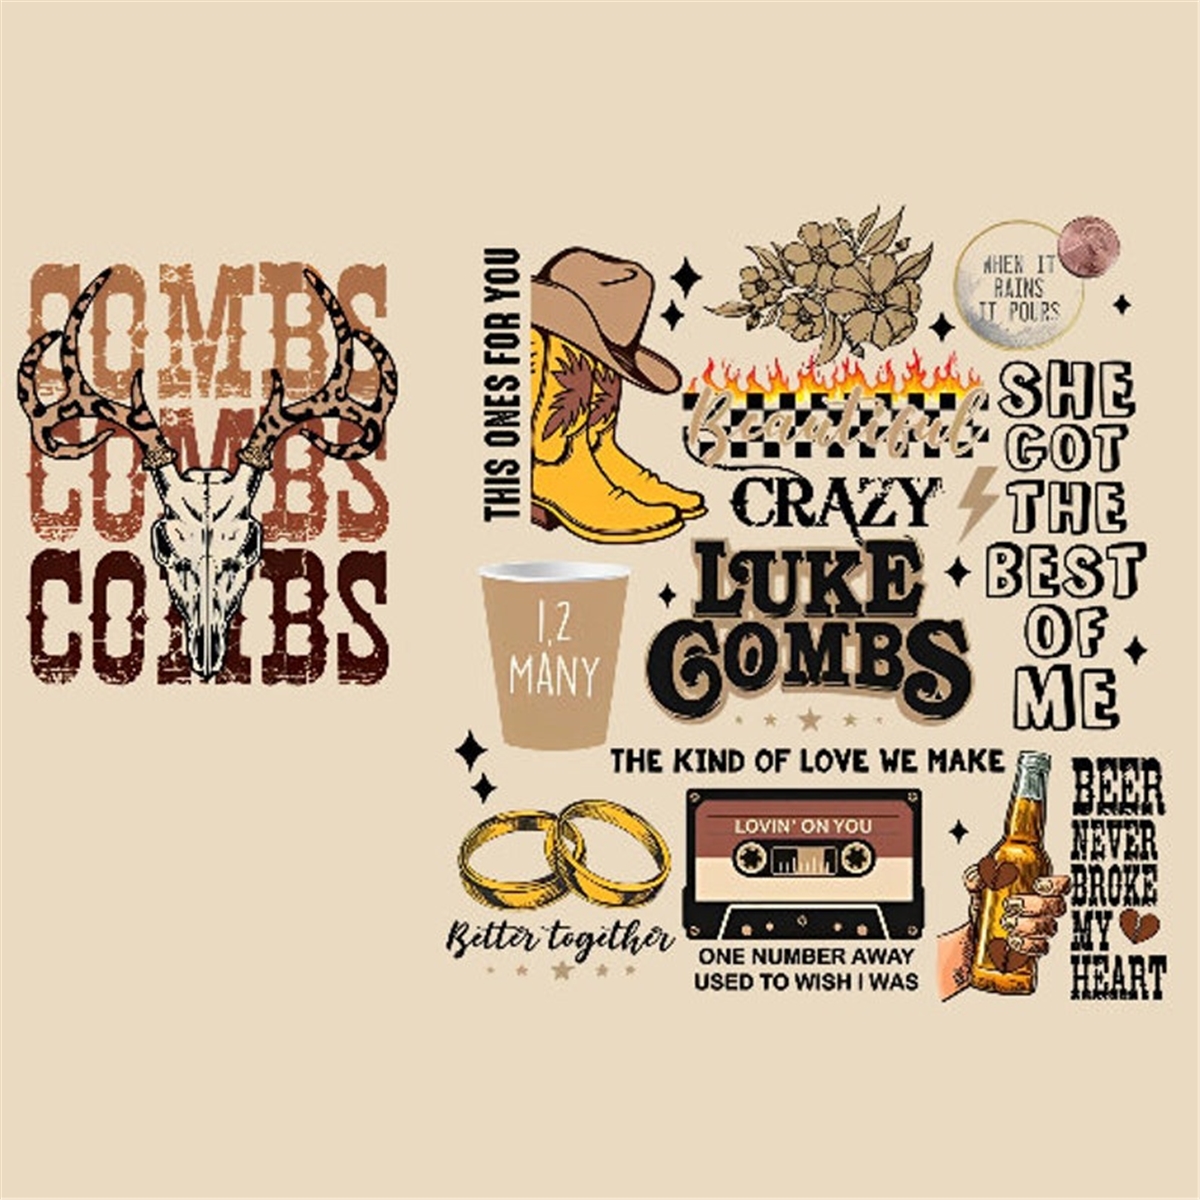 retro-combs-tracklist-bull-skull-png-vintage-luke-combs-png-image-1